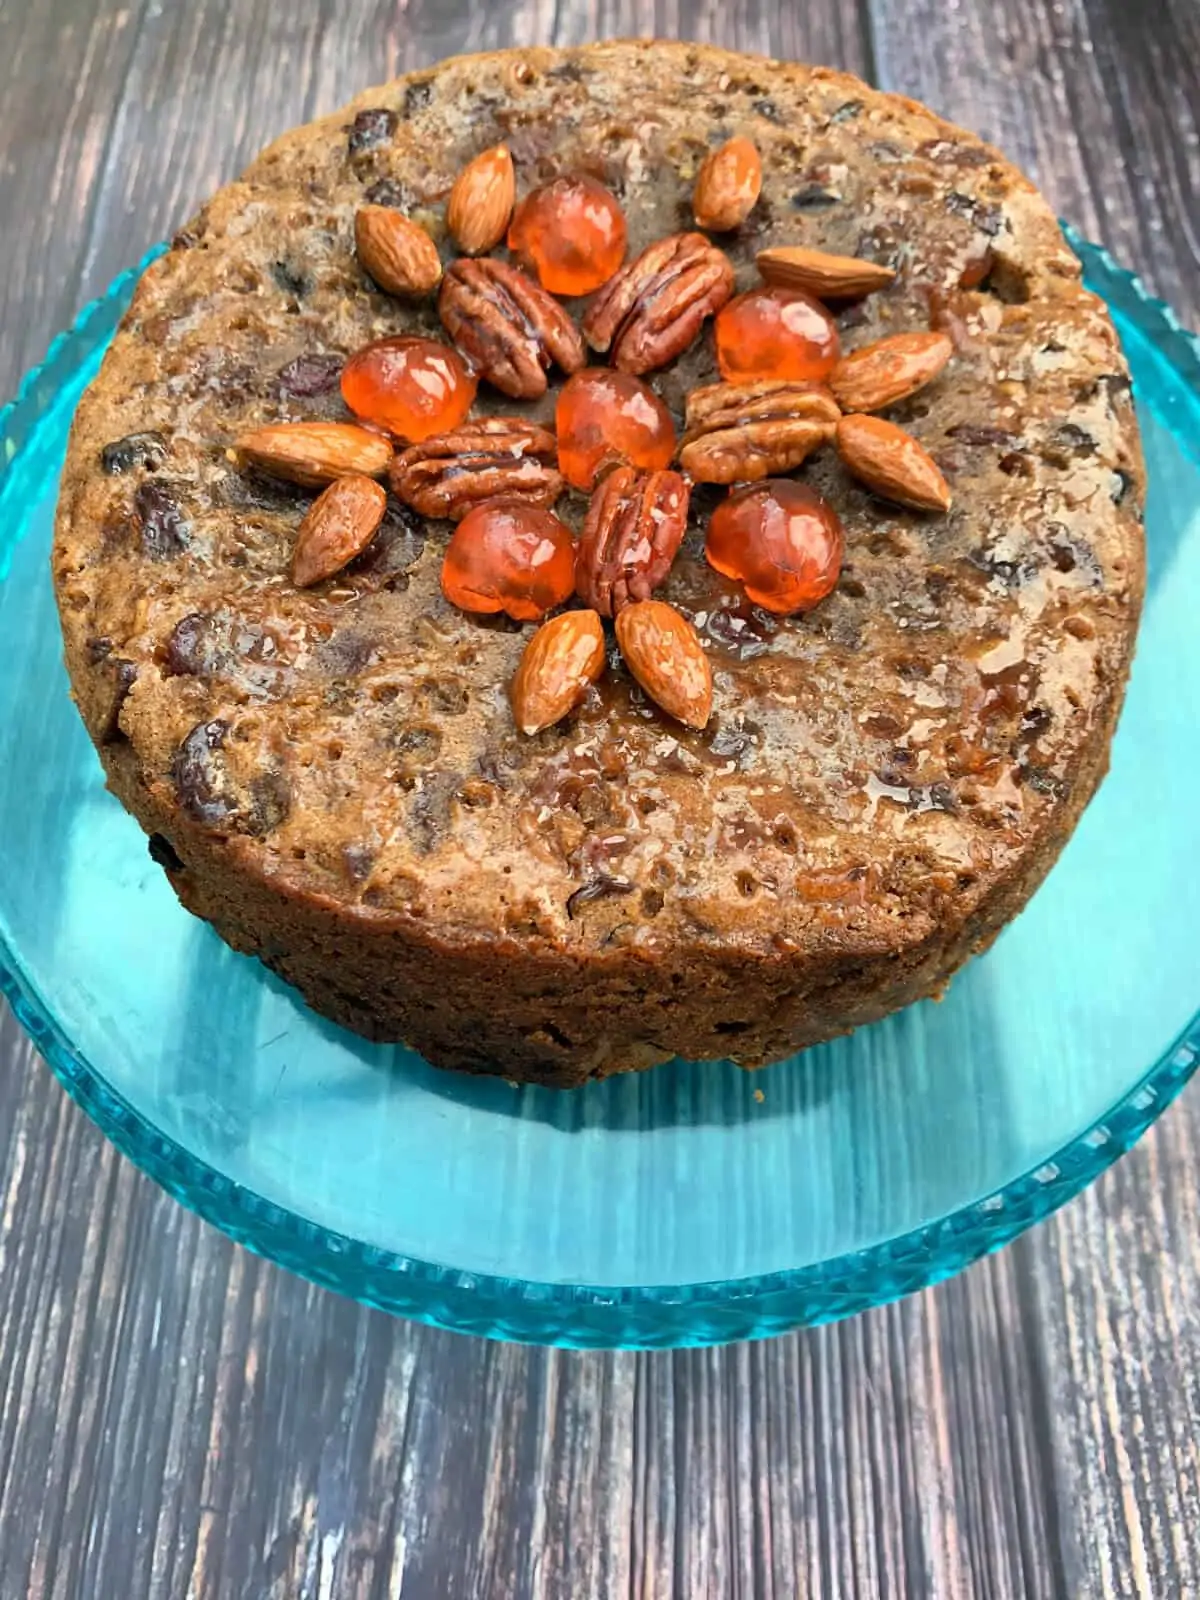 Christmas fruit cake decorated with fruit and nuts on a blue cake stand.